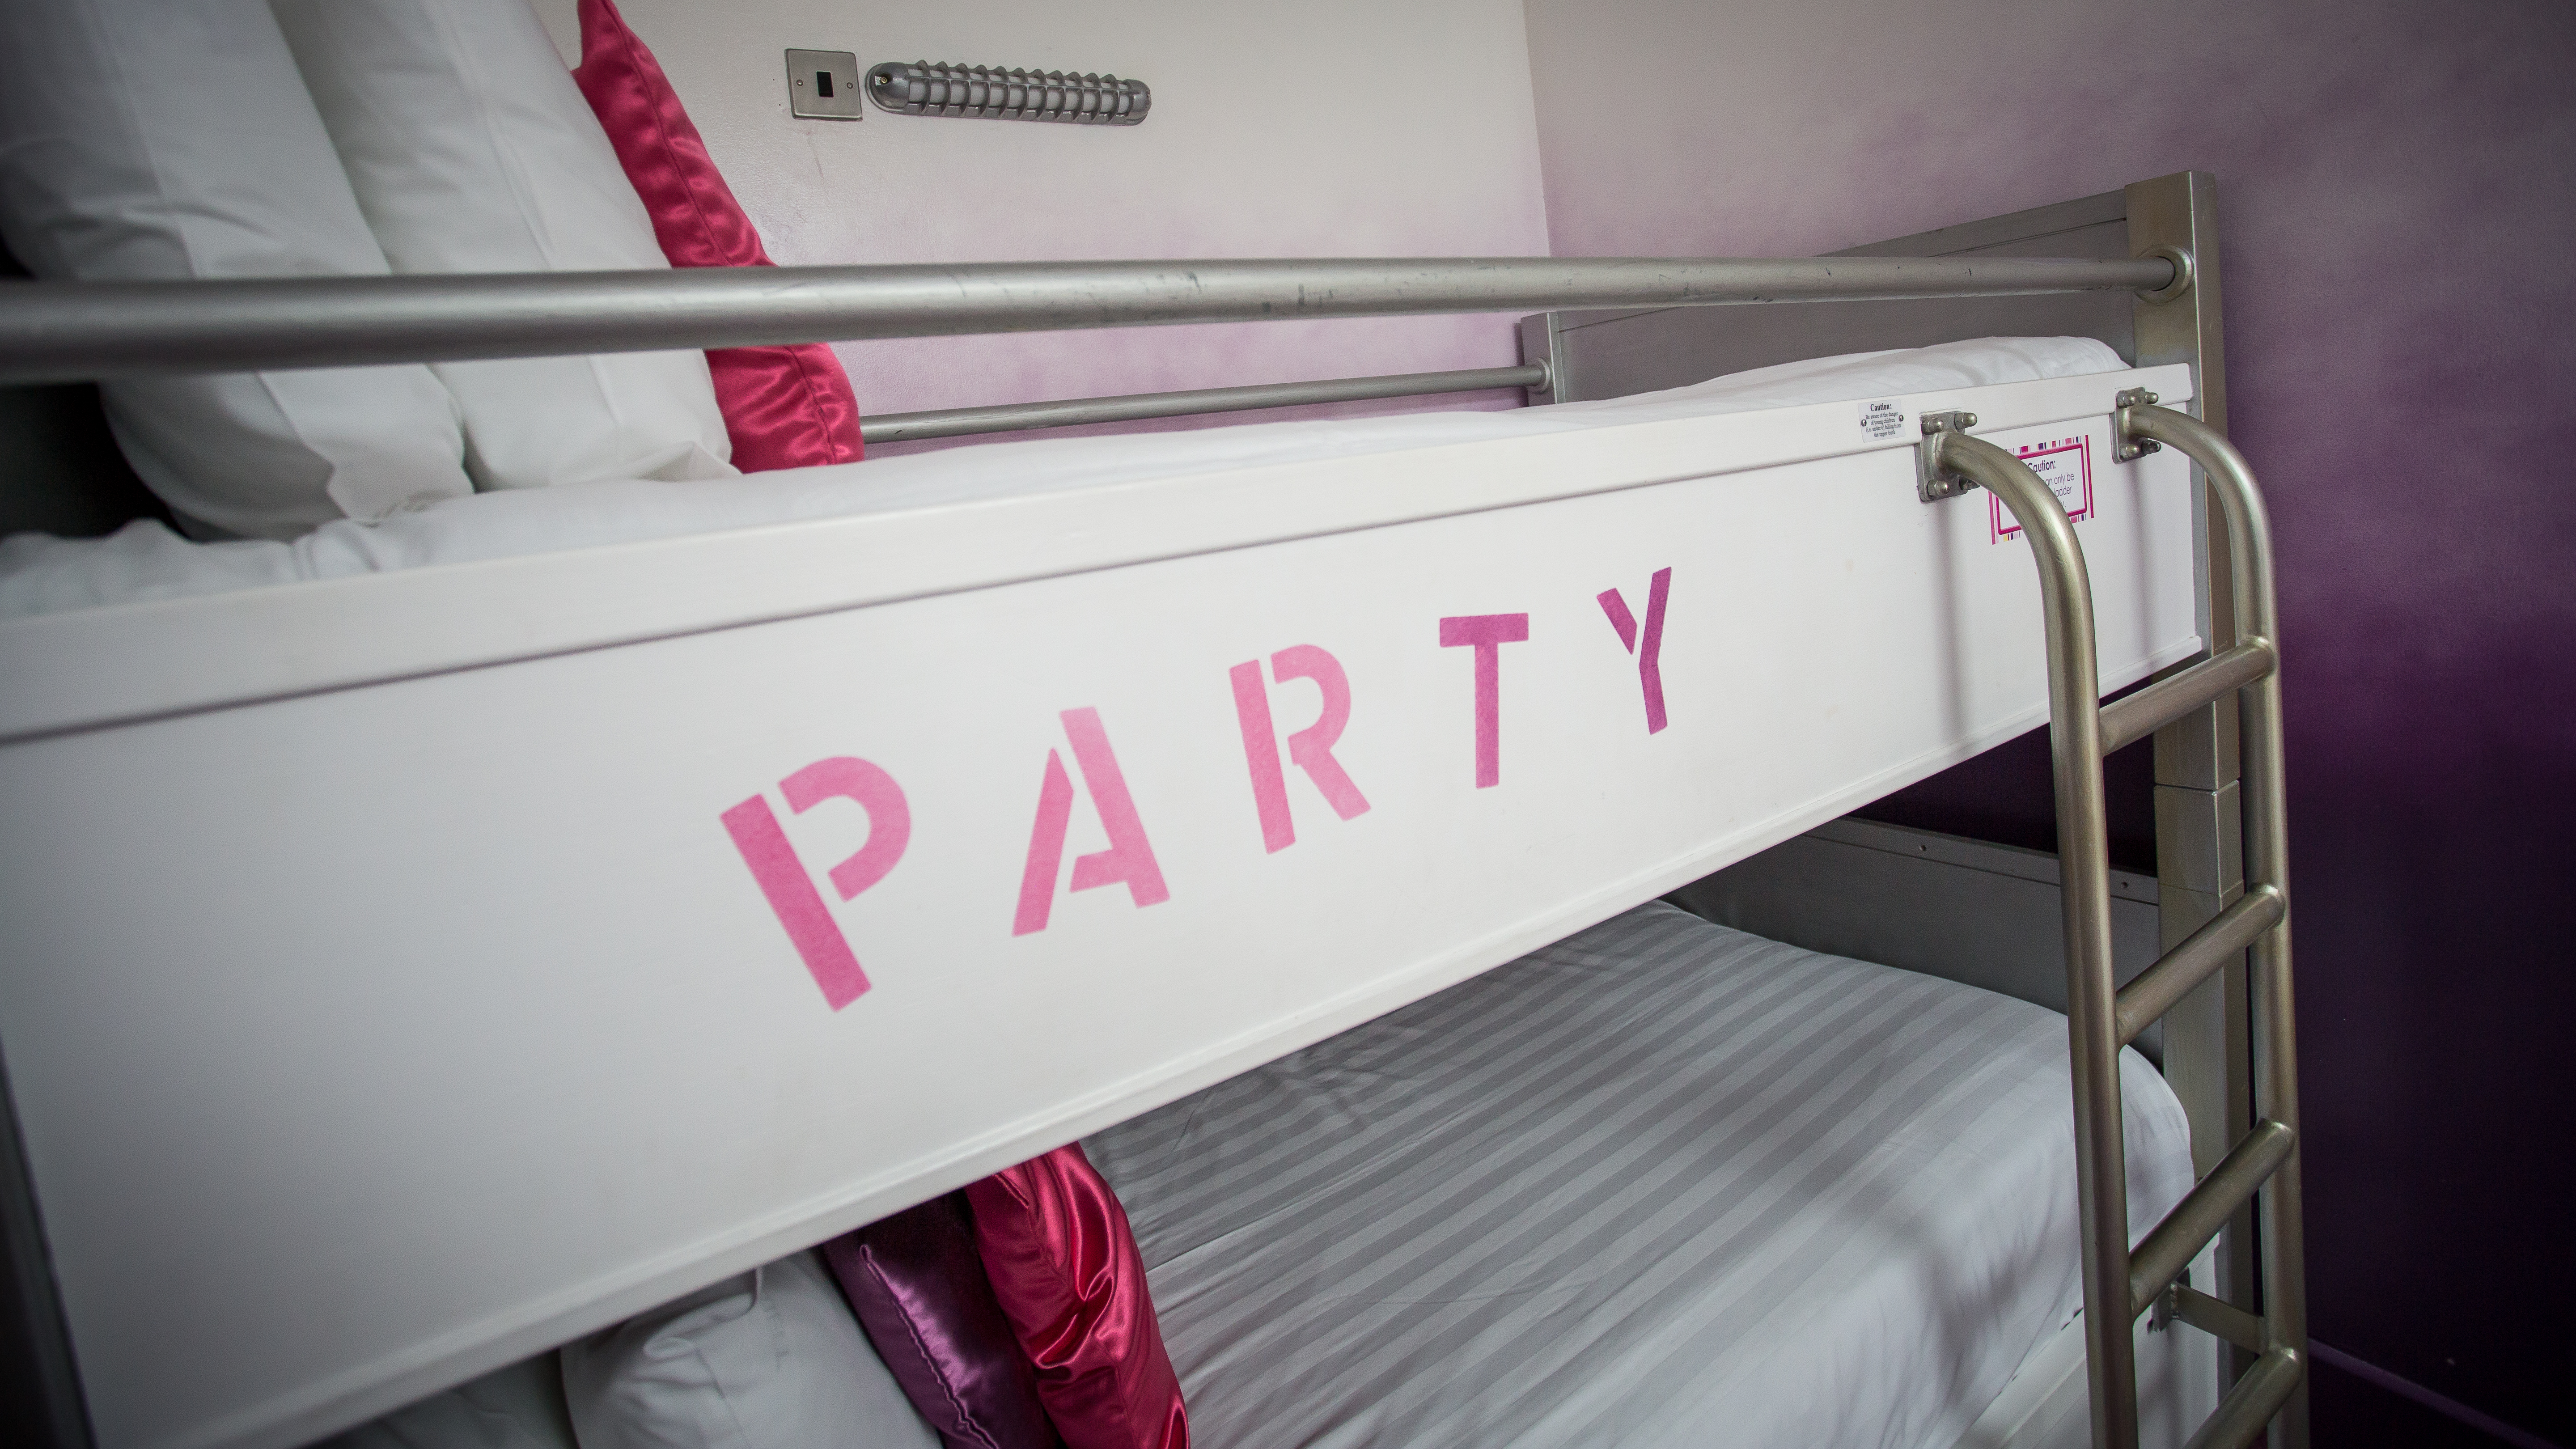 Sleepover room 'Party' detail